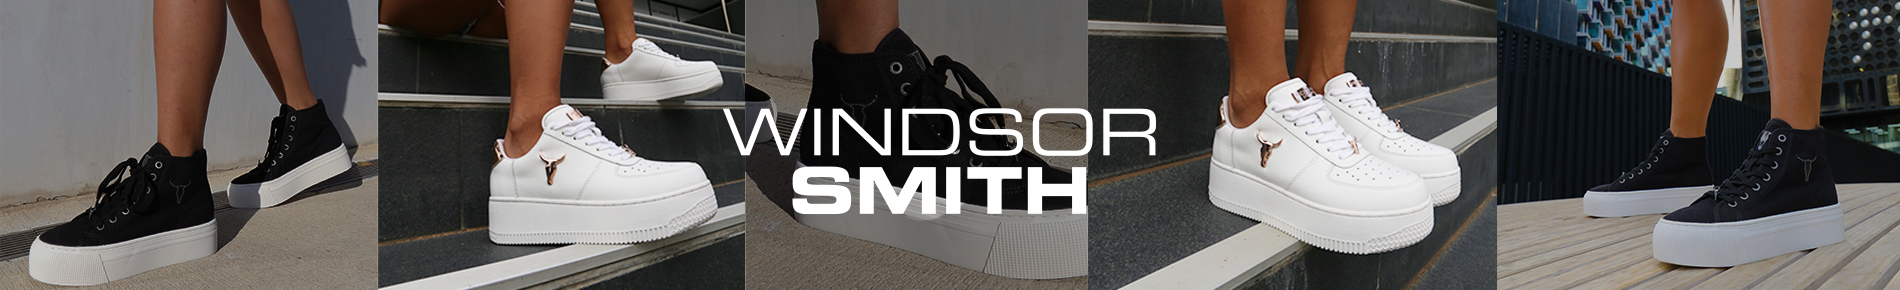 myer windsor smith shoes